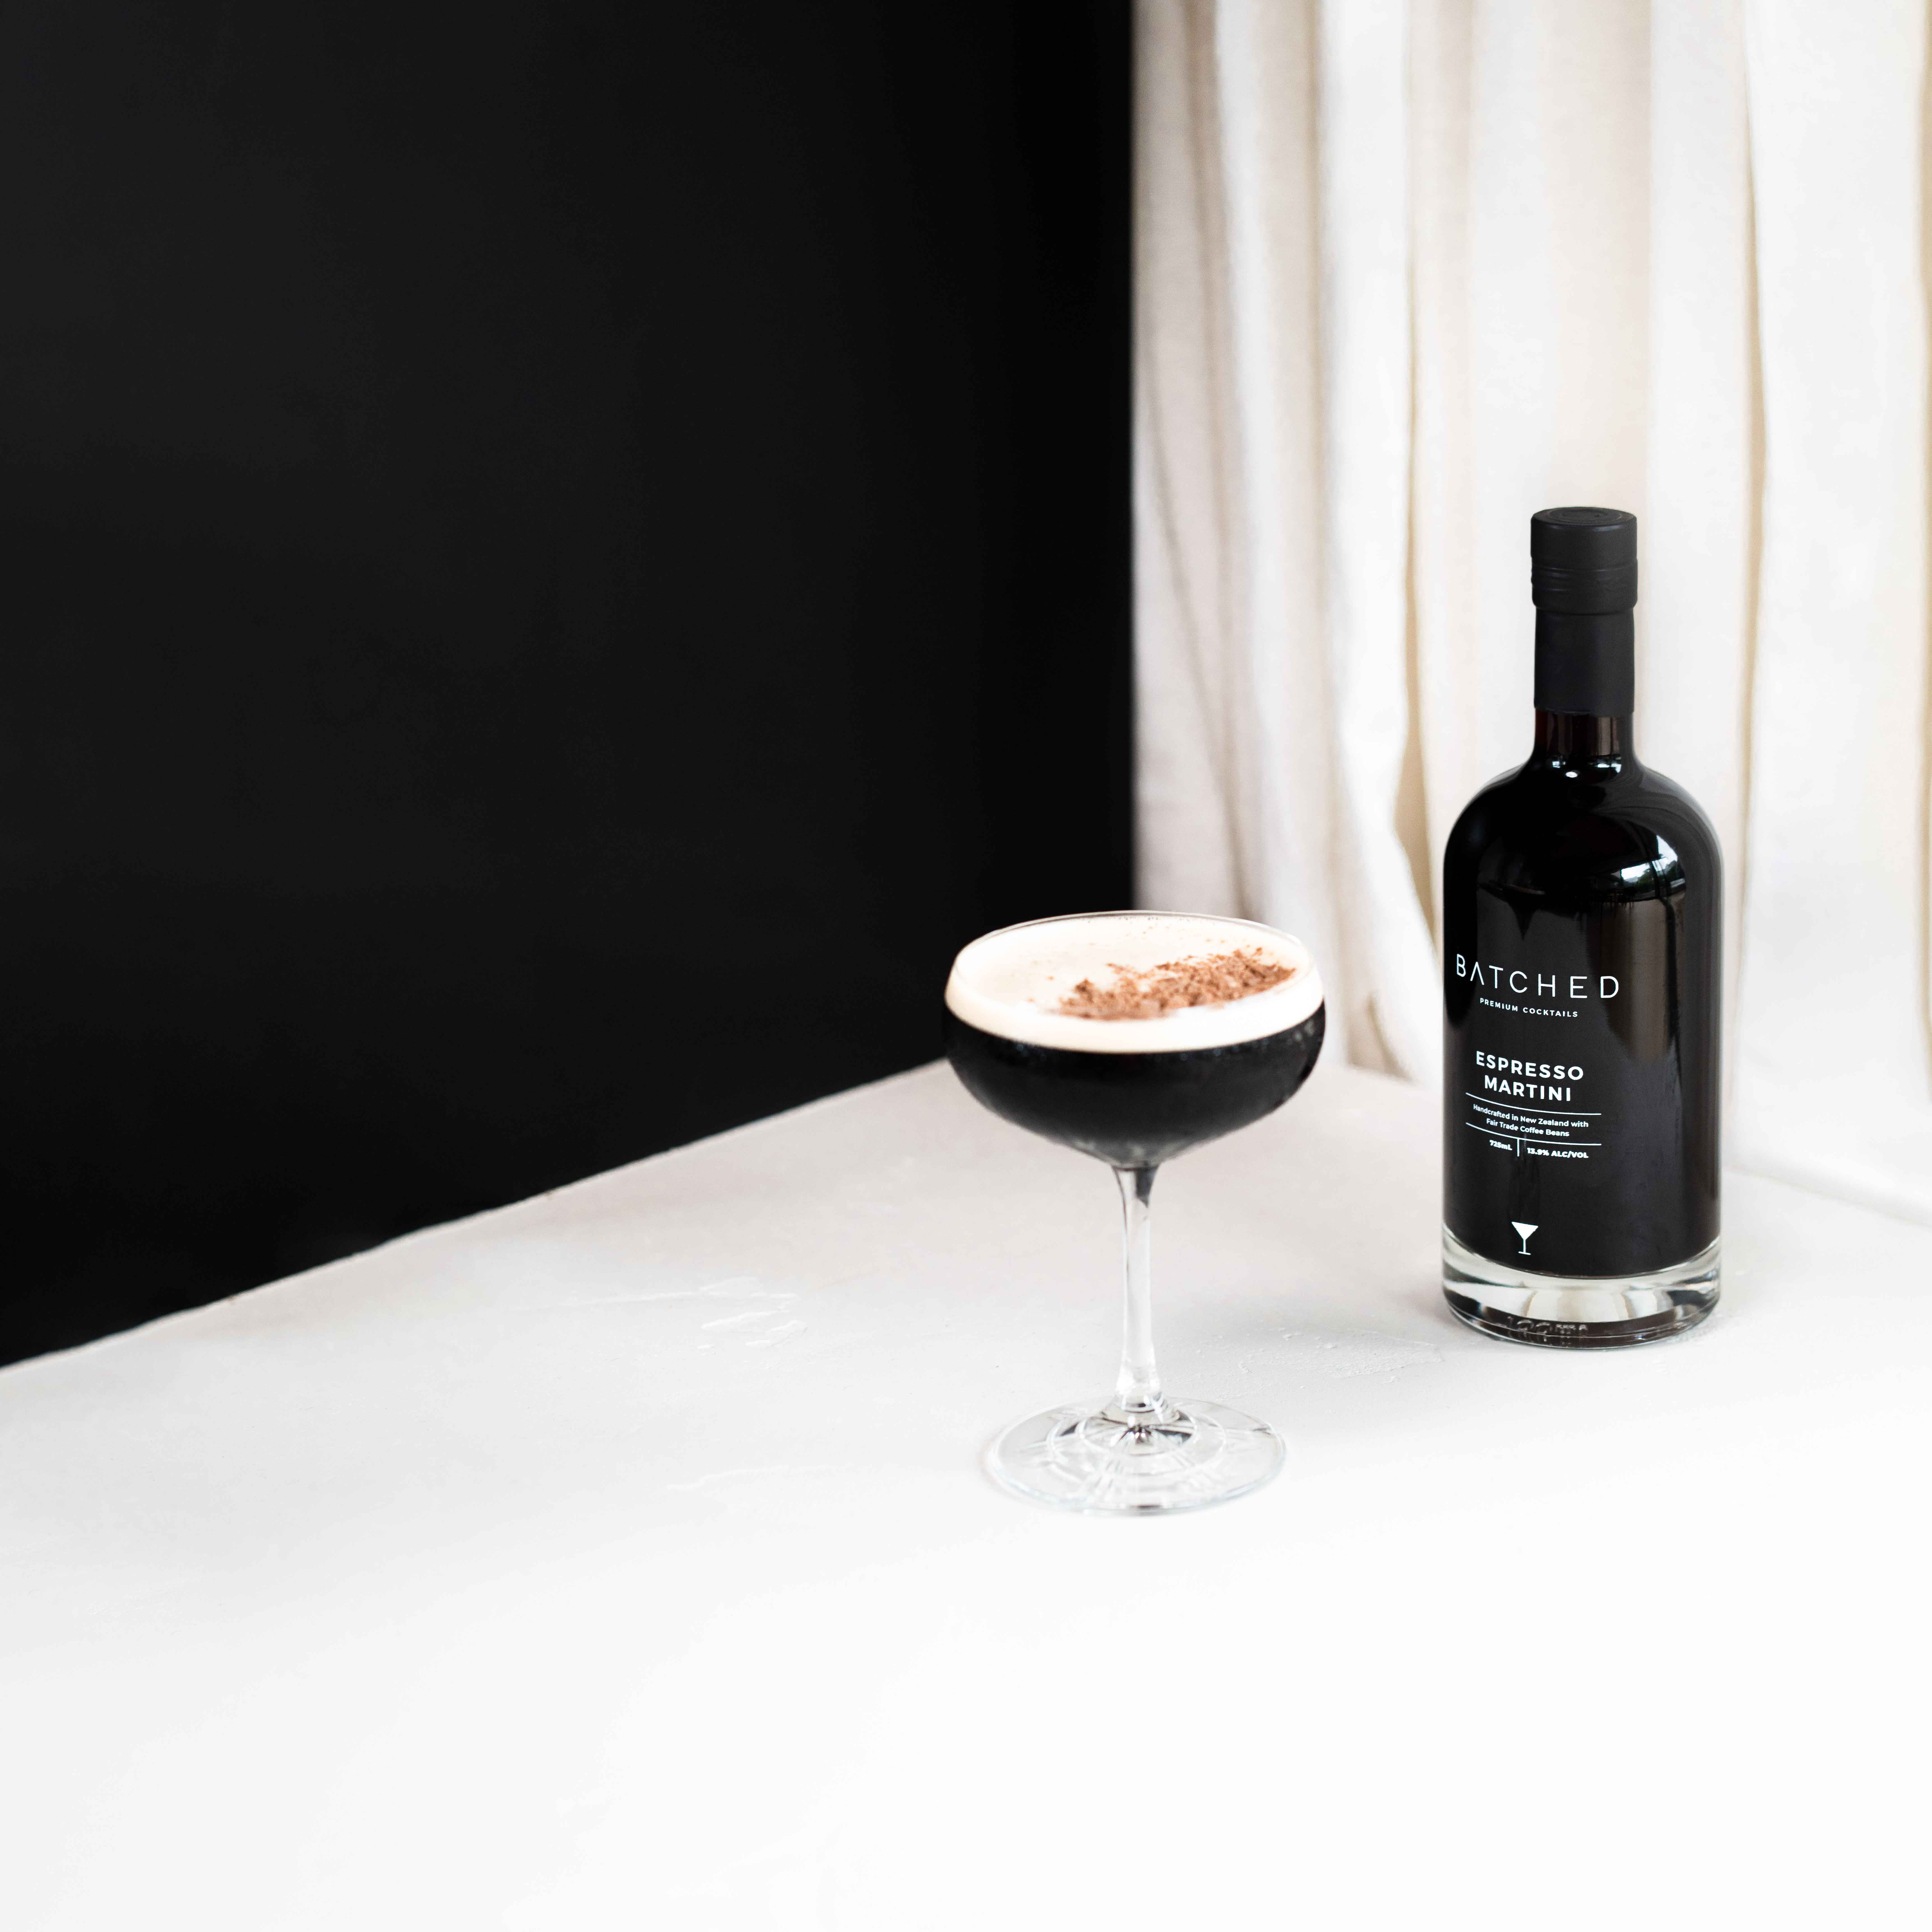 Batched Espresso Martini bottle and glass served on table with black and white background